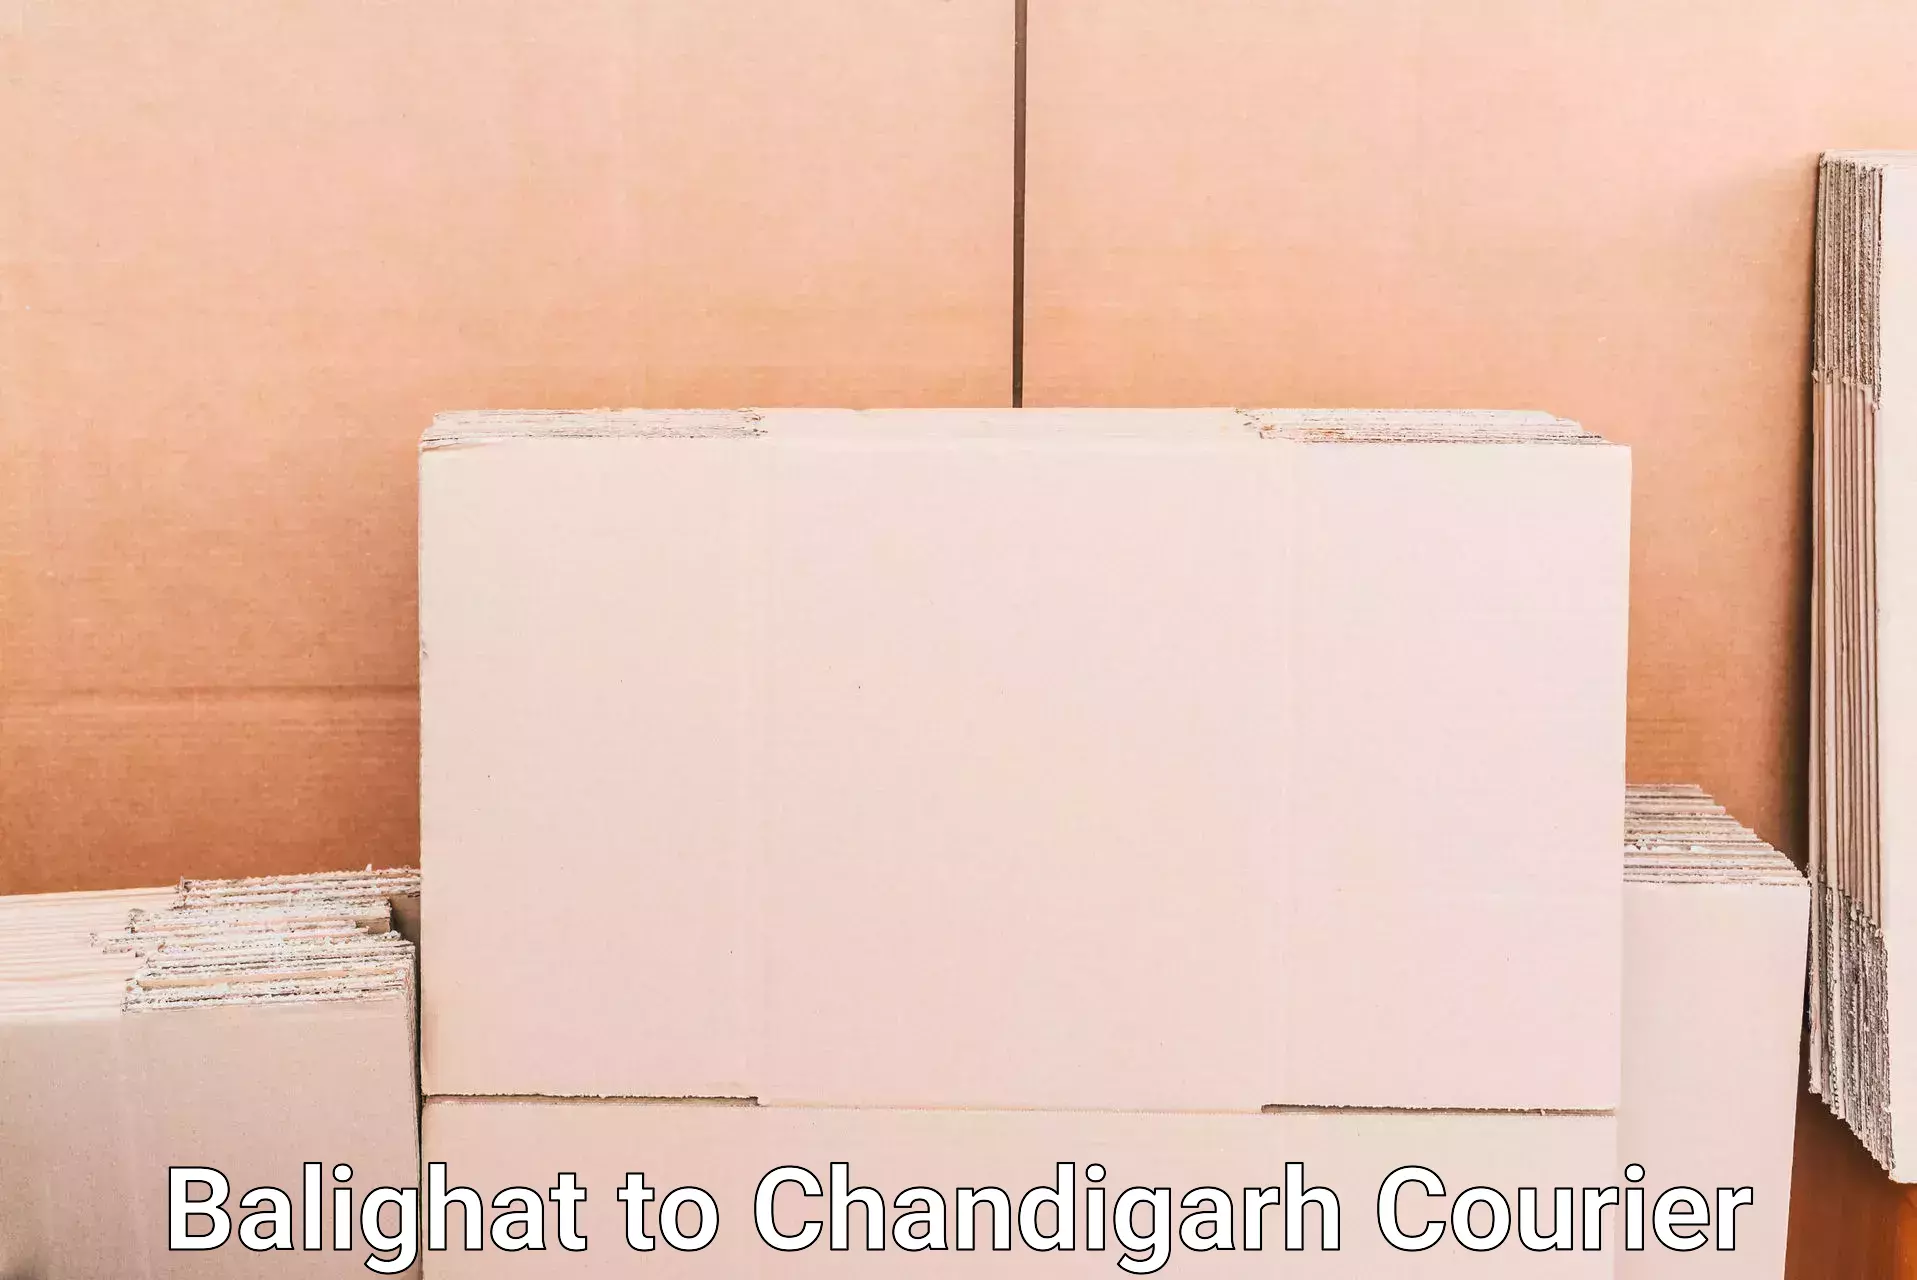 Luggage shipment specialists Balighat to Chandigarh